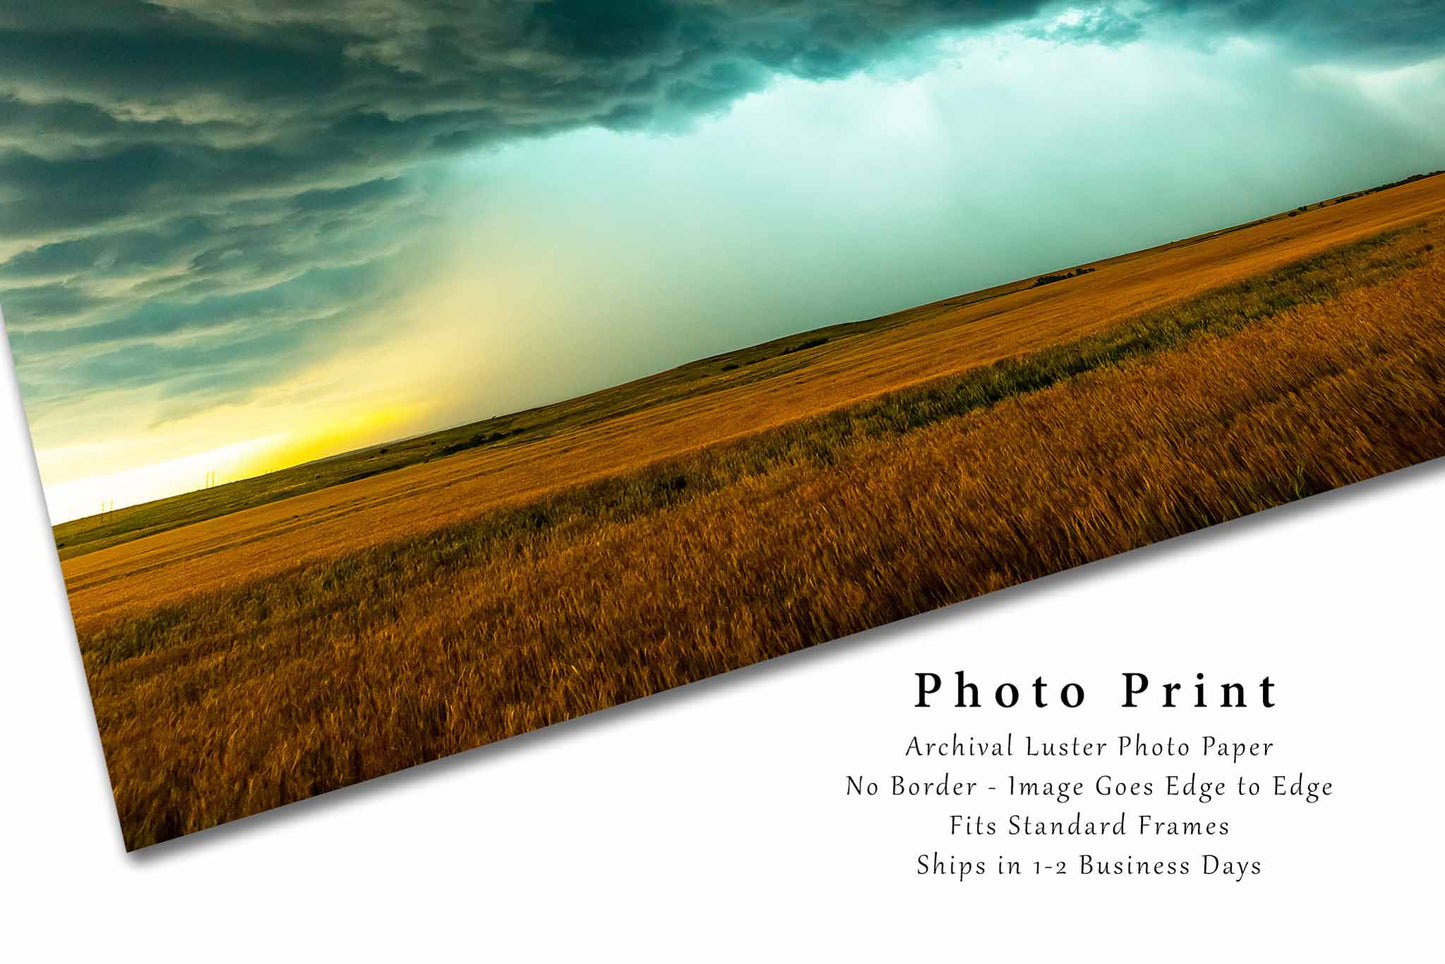 Storm Photography Print - Picture of Supercell Thunderstorm Dropping Rain over Wheat Field in Oklahoma - Weather Photo Artwork Nature Decor